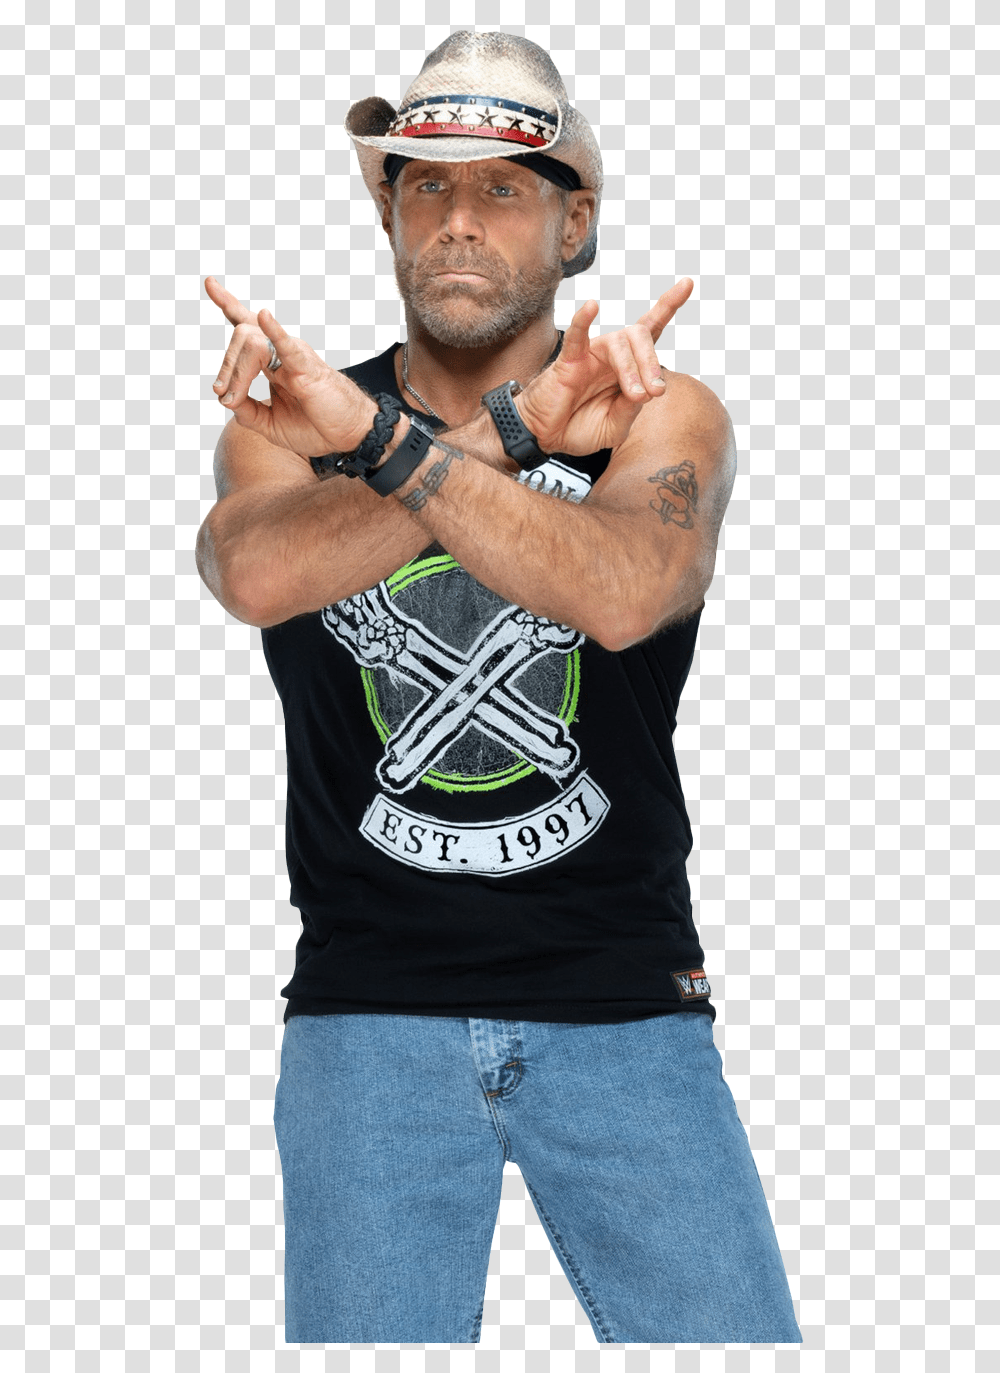 Shawn Michaels Background Wwe 2k20 Roster Reveal, Person, Skin, Arm Transparent Png